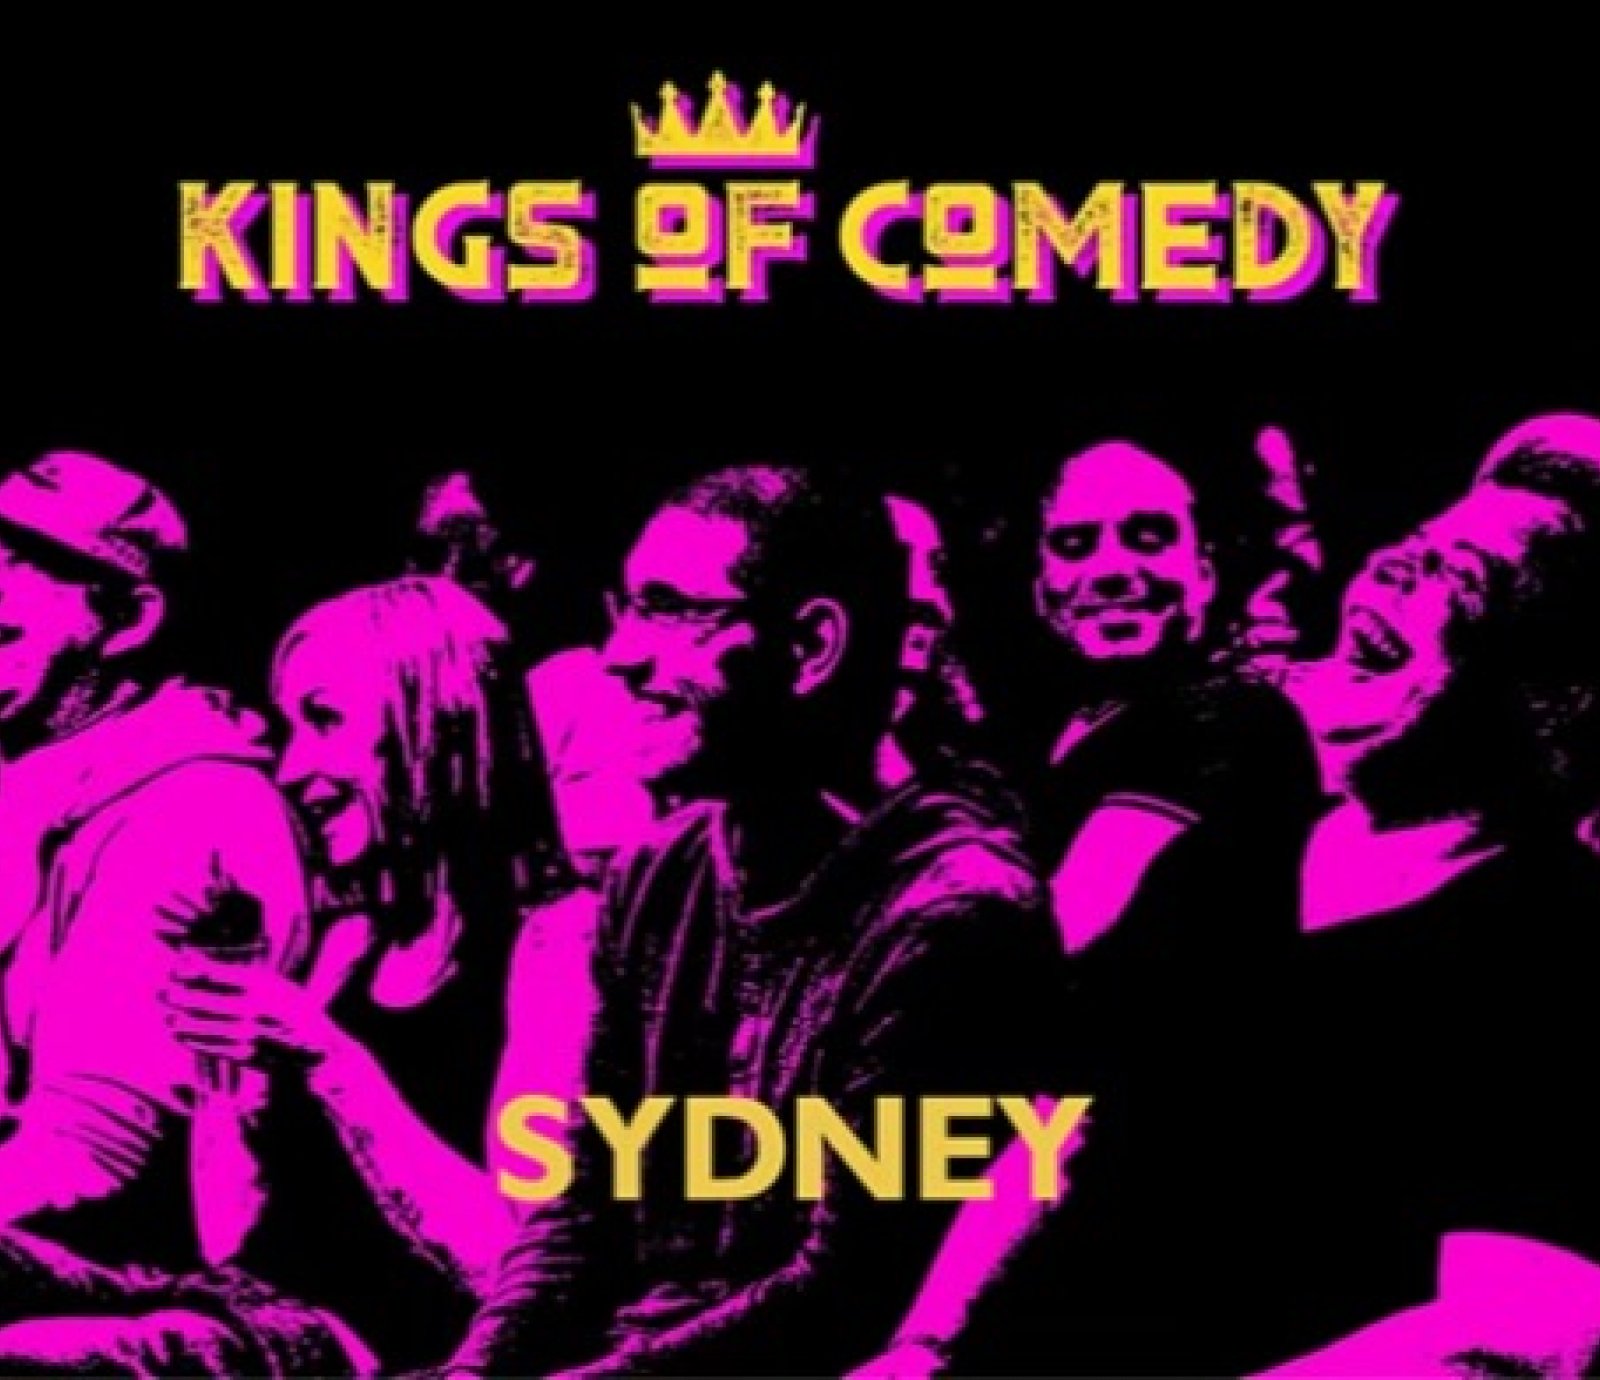 Kings of Comedy's Sydney